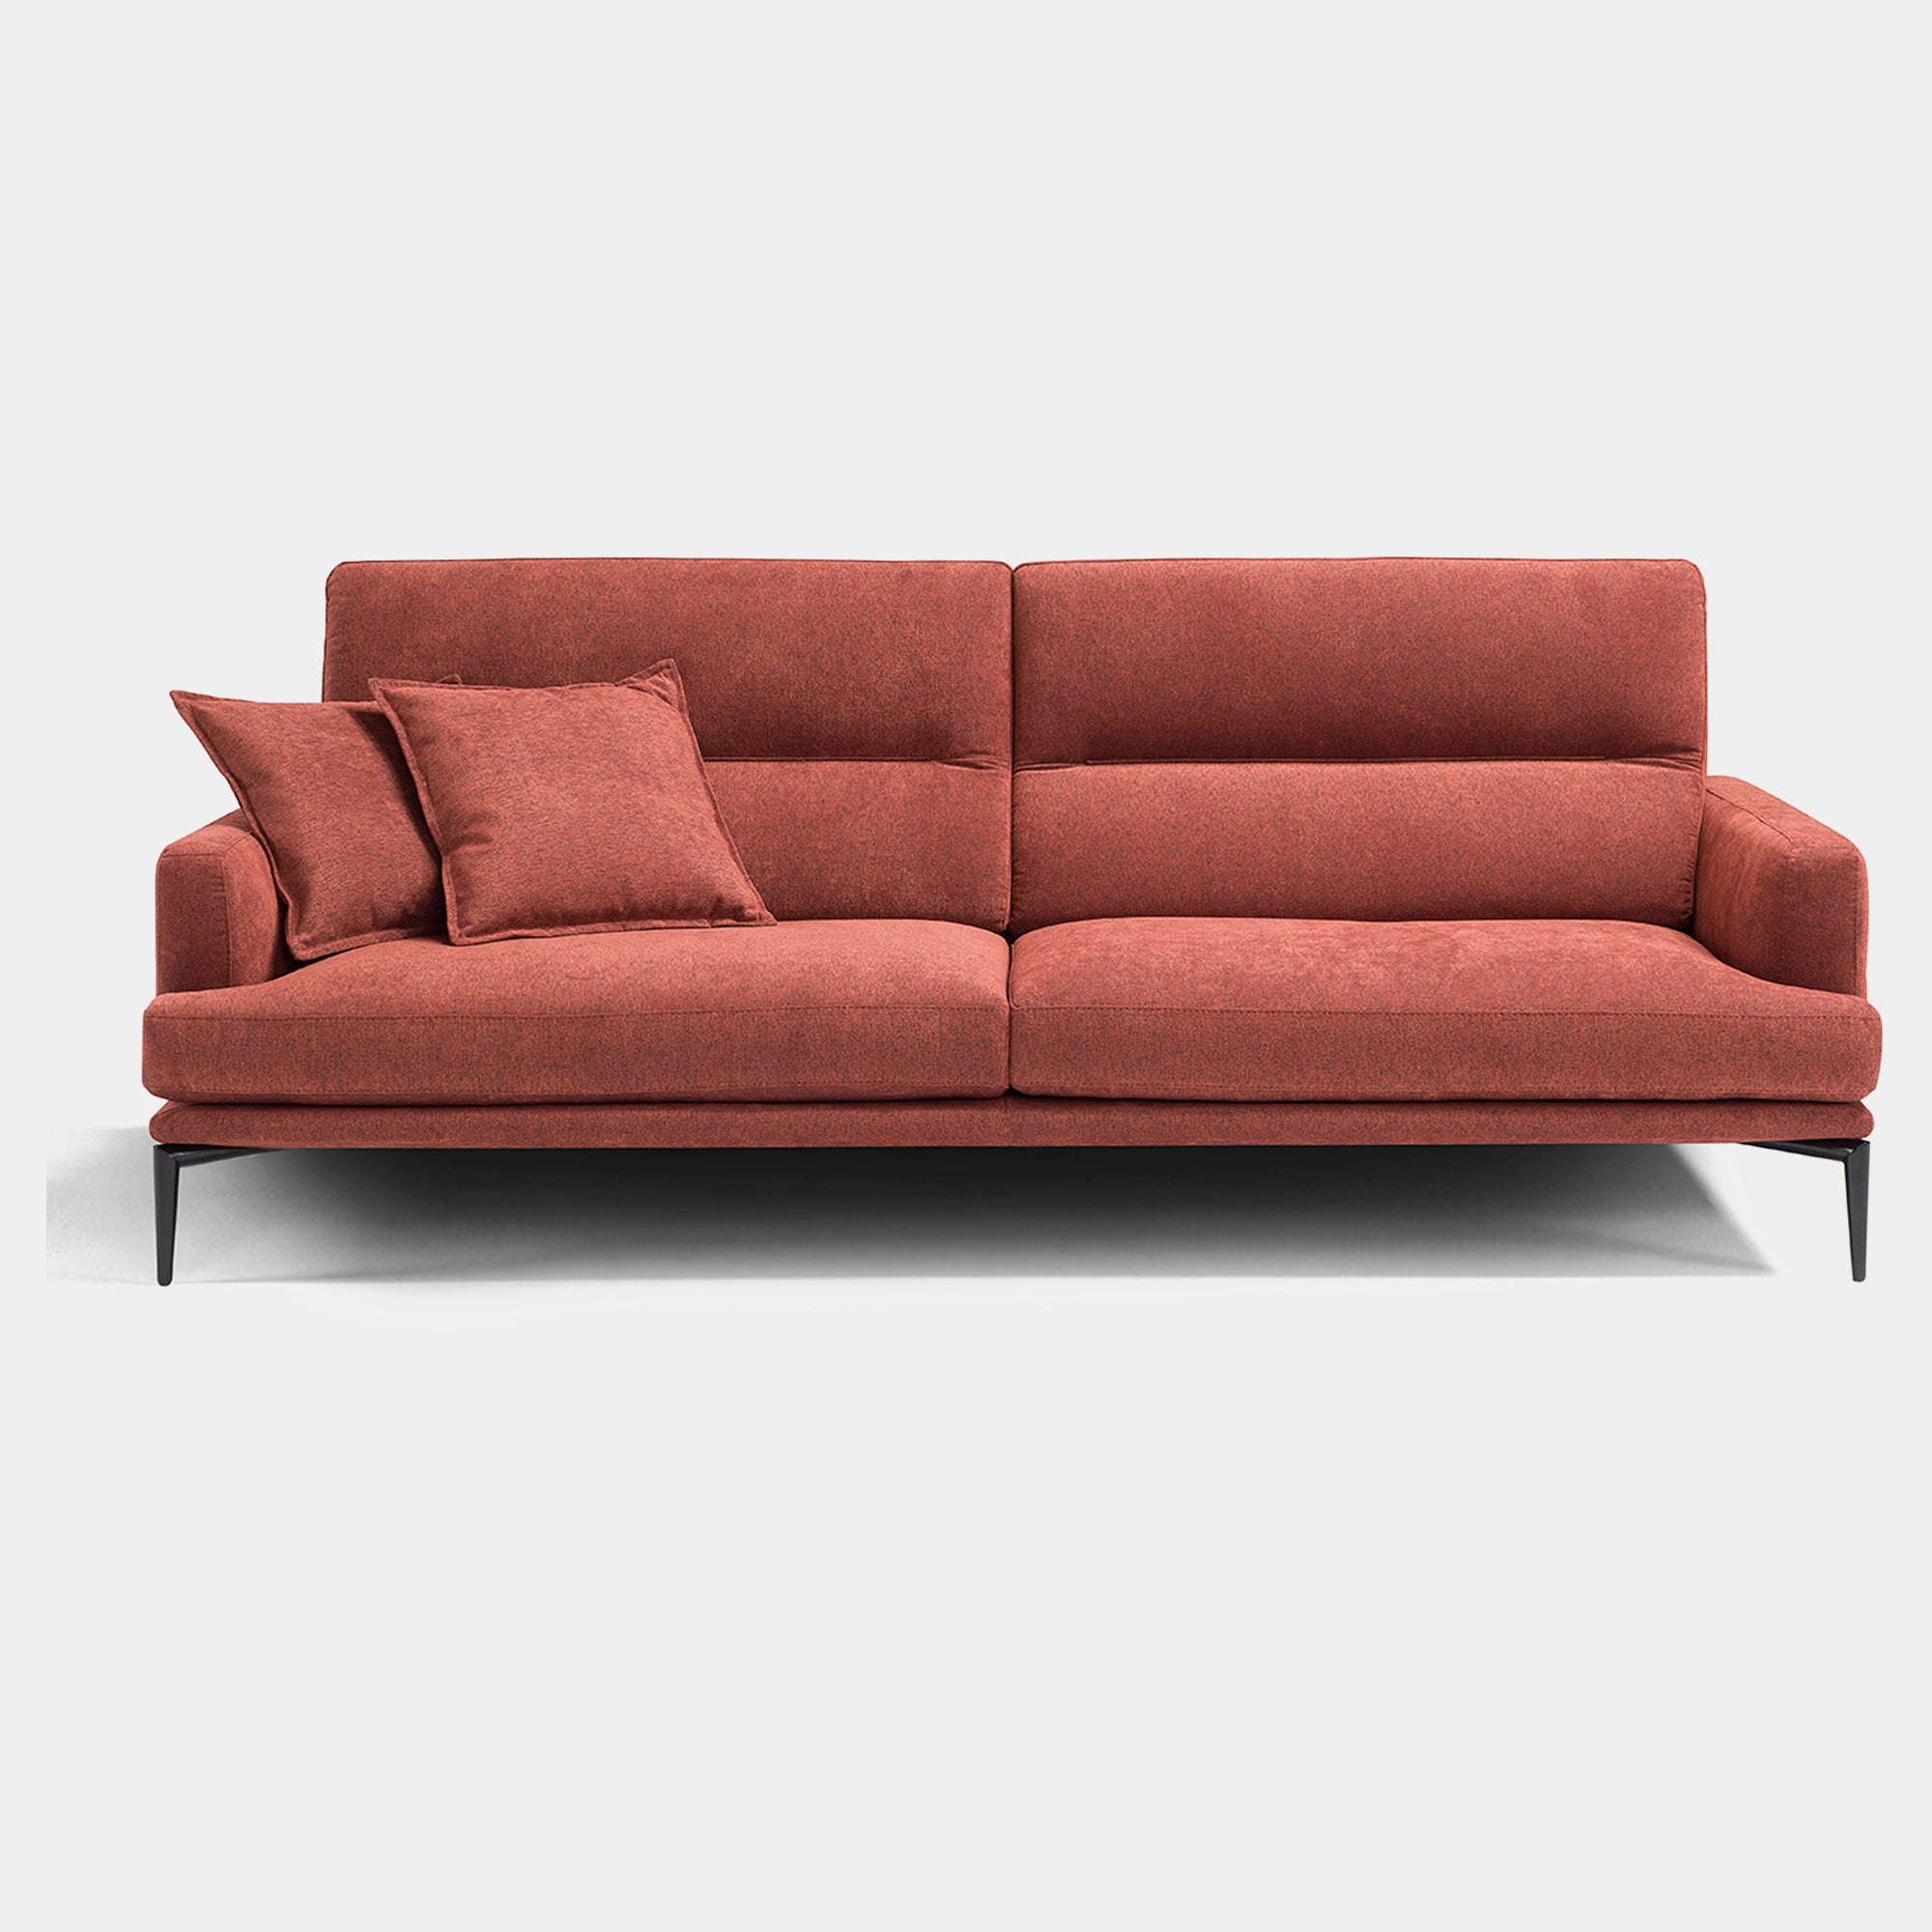 Laterza - 3 Seat Adjustable Sofa In Fabric Or Leather Microfibre